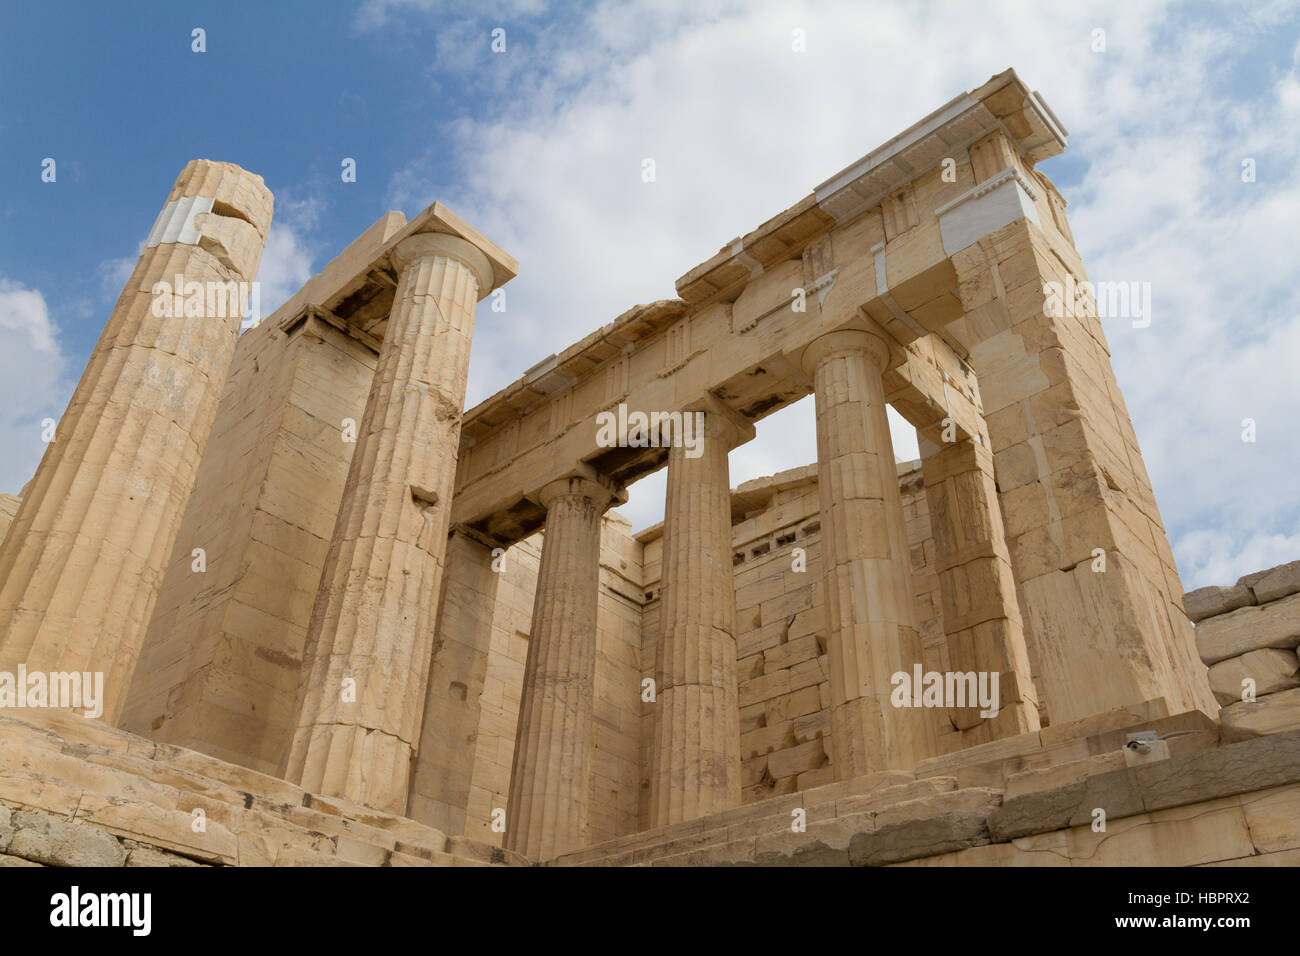 Columns of a temple on the Acropolis of Athens, Greece photographed from a low perspective Stock Photo